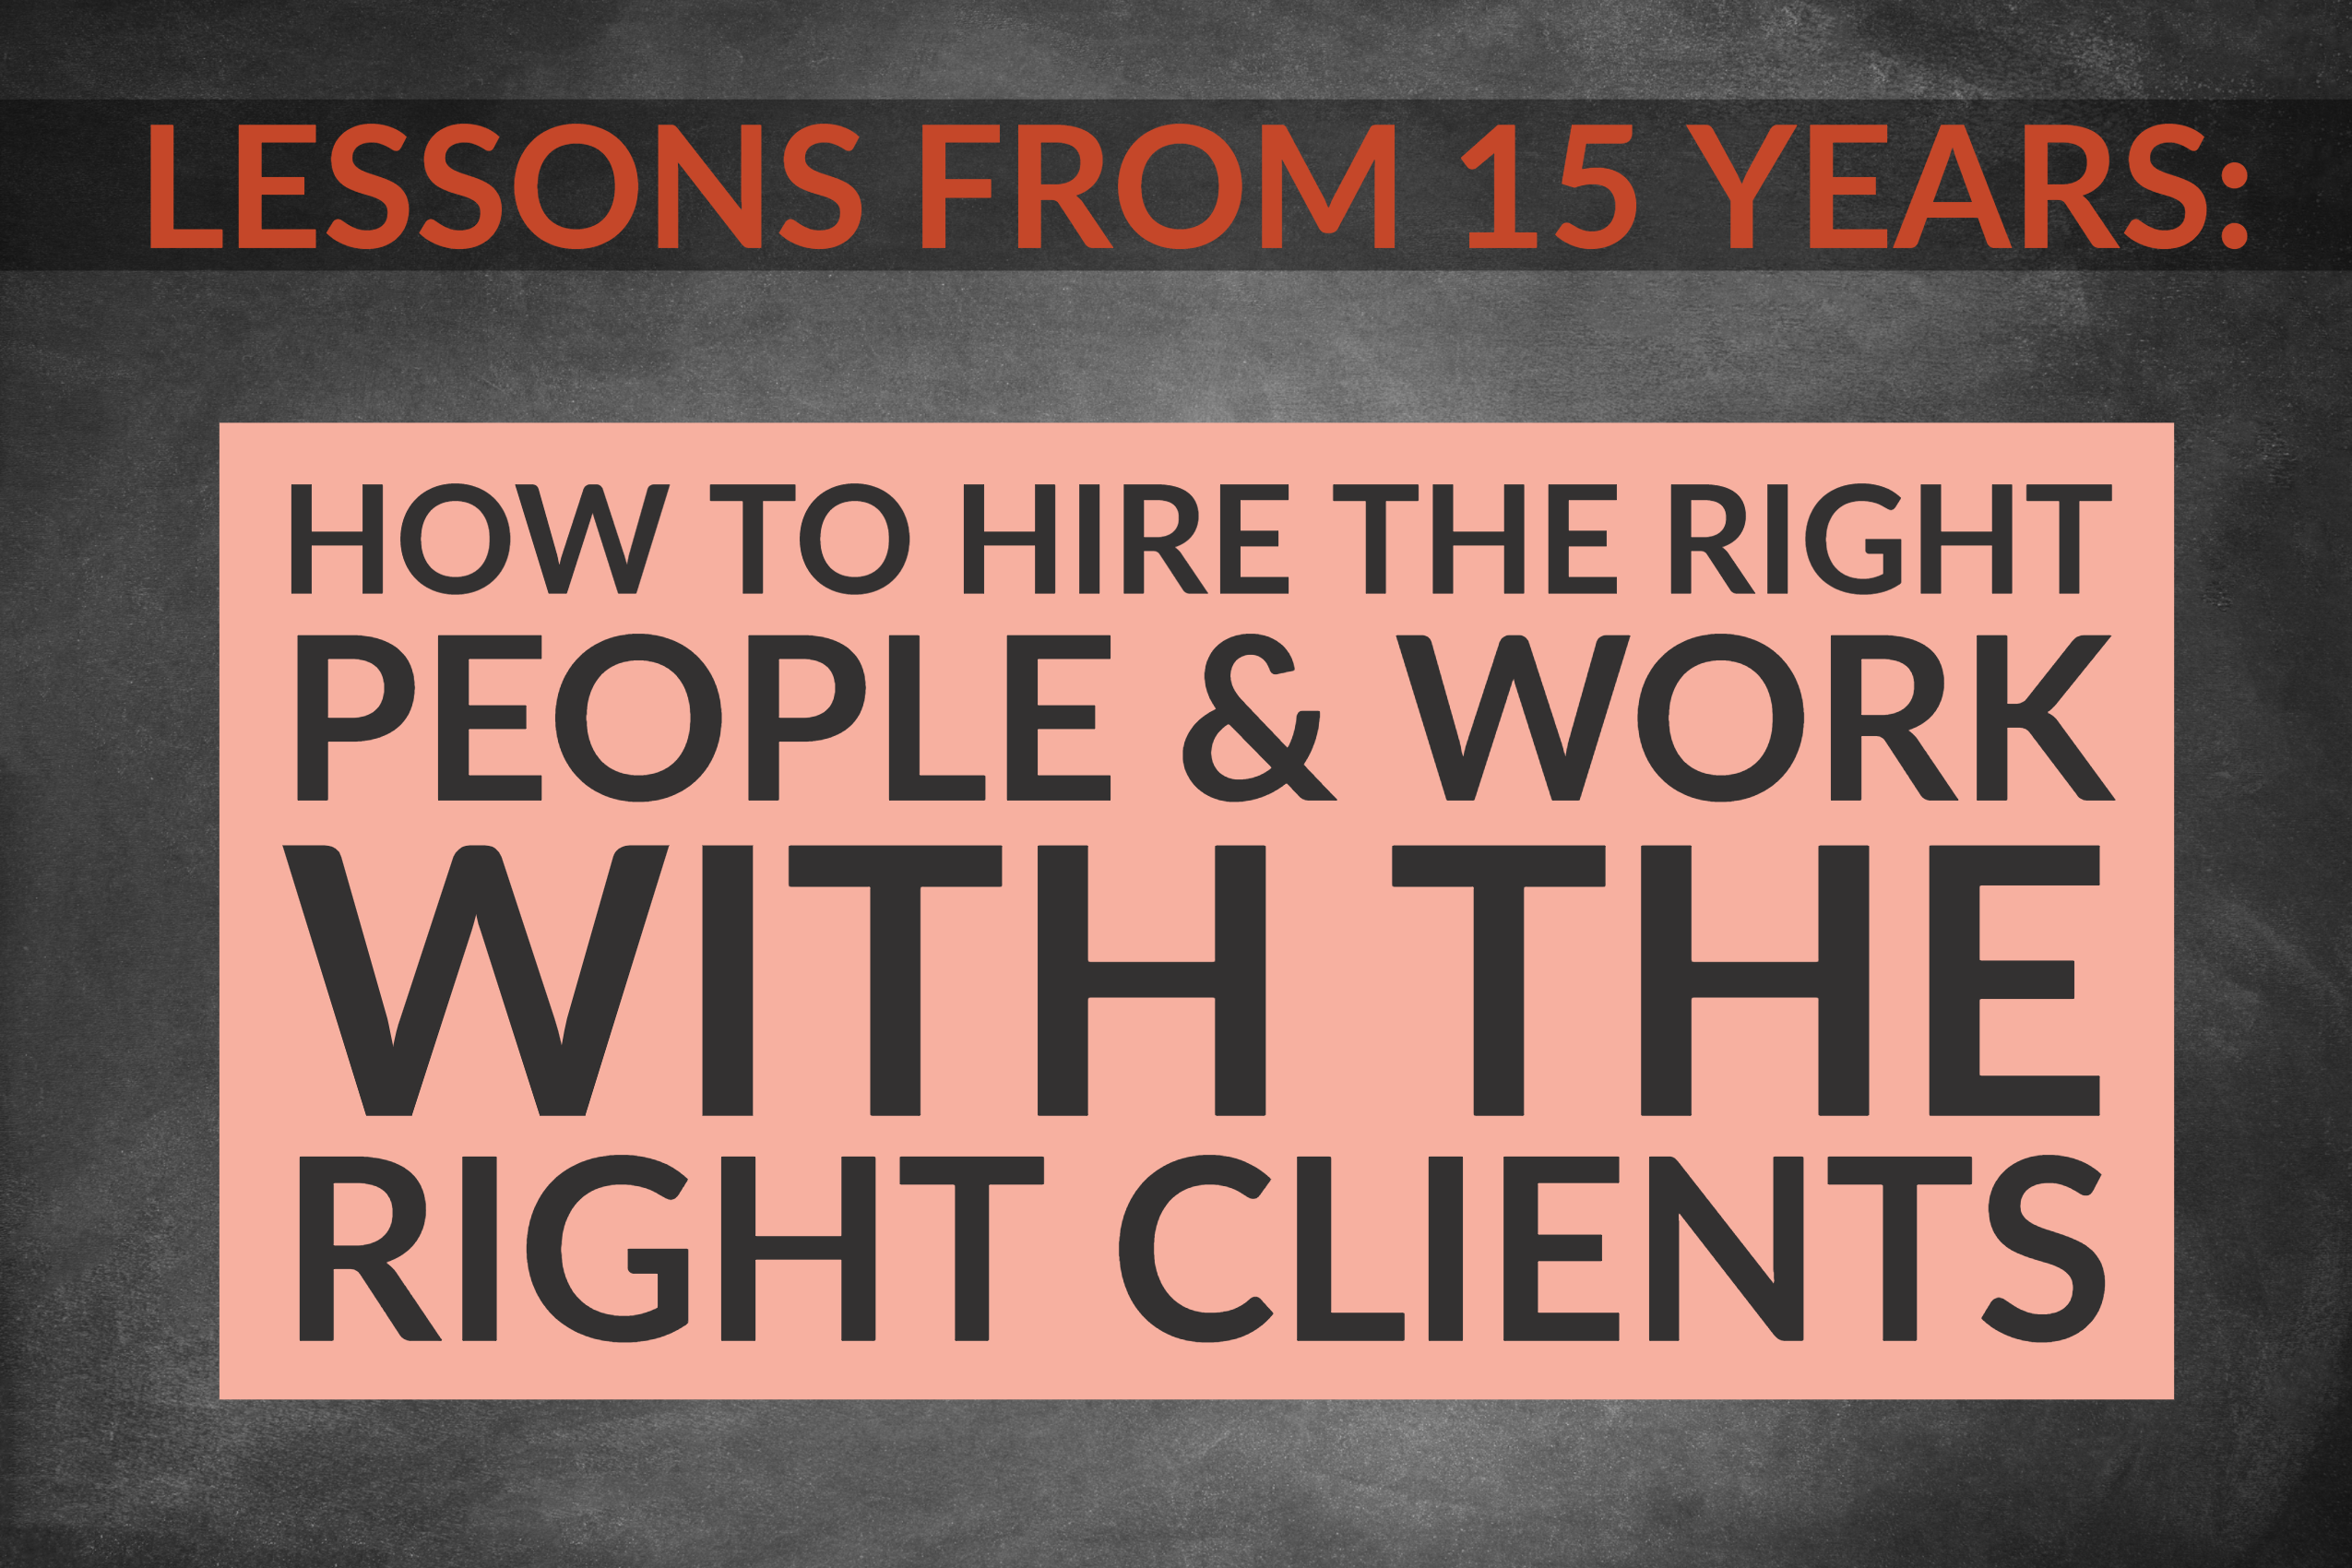 Lessons From 15 Years: How To Hire The Right People & Work With The Right Clients